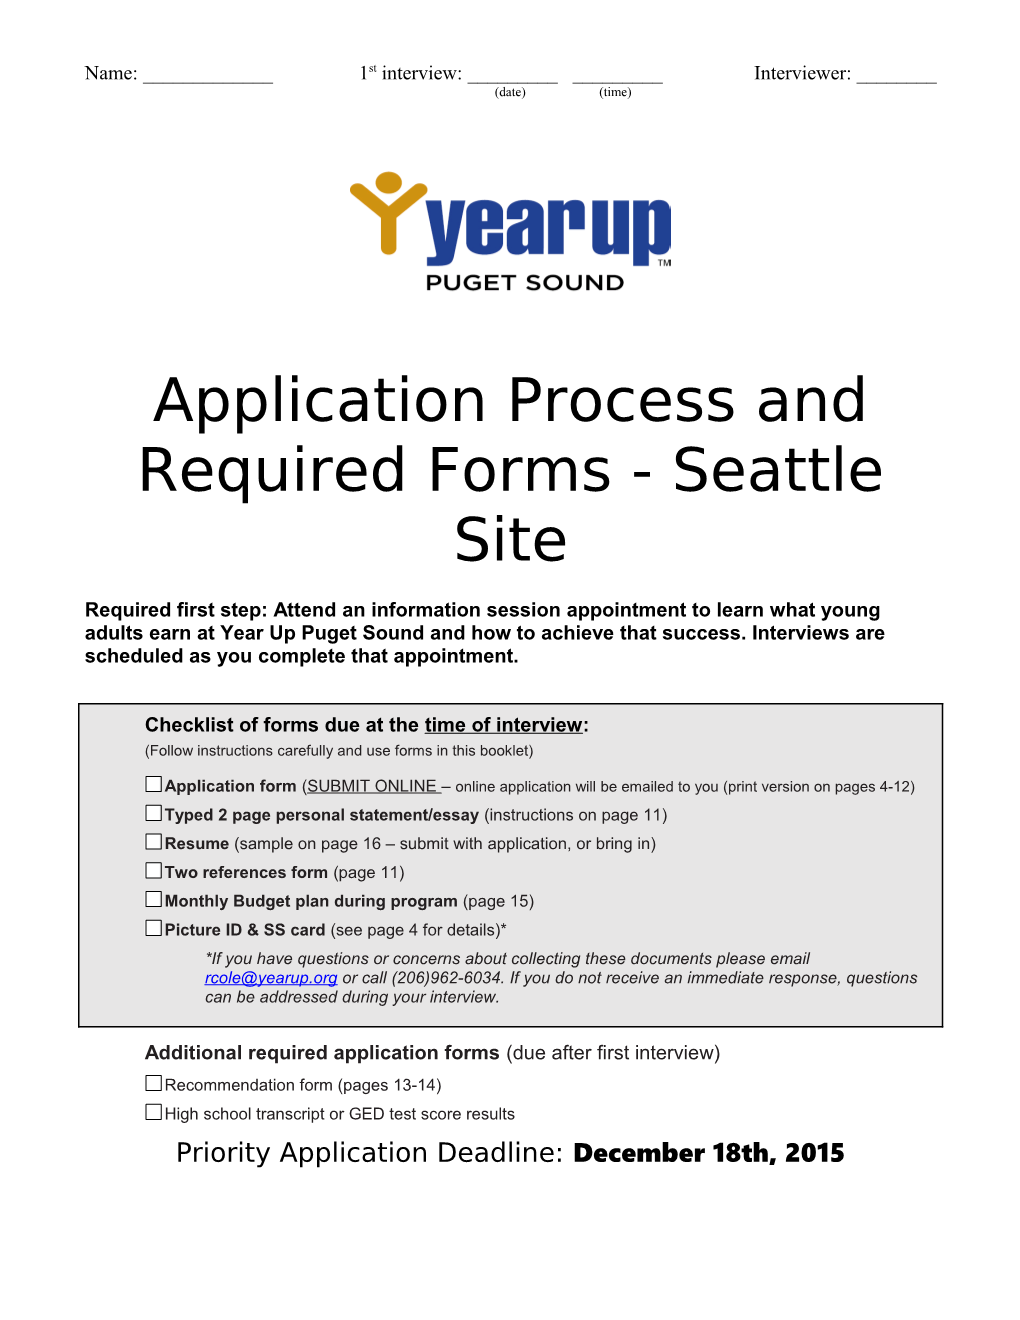 Application Processand Required Forms-Seattle Site